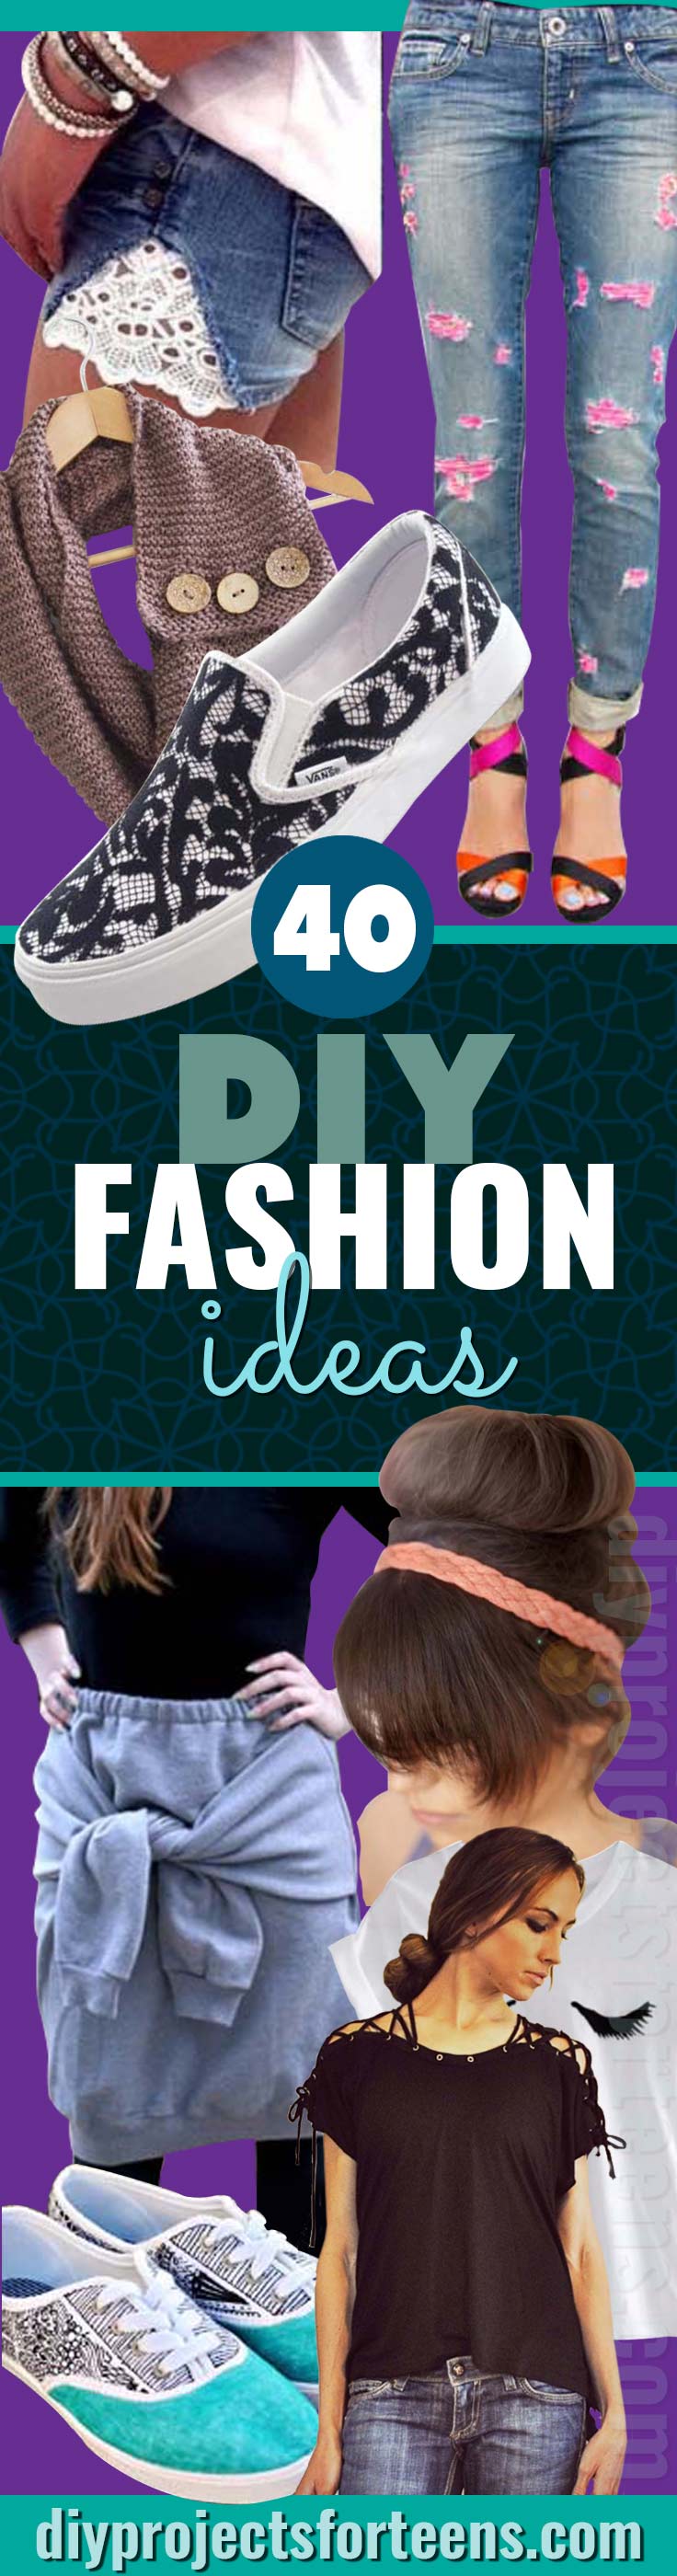 DIY Fashion Projects For Teens - Cool Homemade Clothes Tutorials for Fun Things To Wear. T Shirts, Skirts, Shoes, Shorts, Jeans - Teen Clothing DYI - Crafts for Teenagers